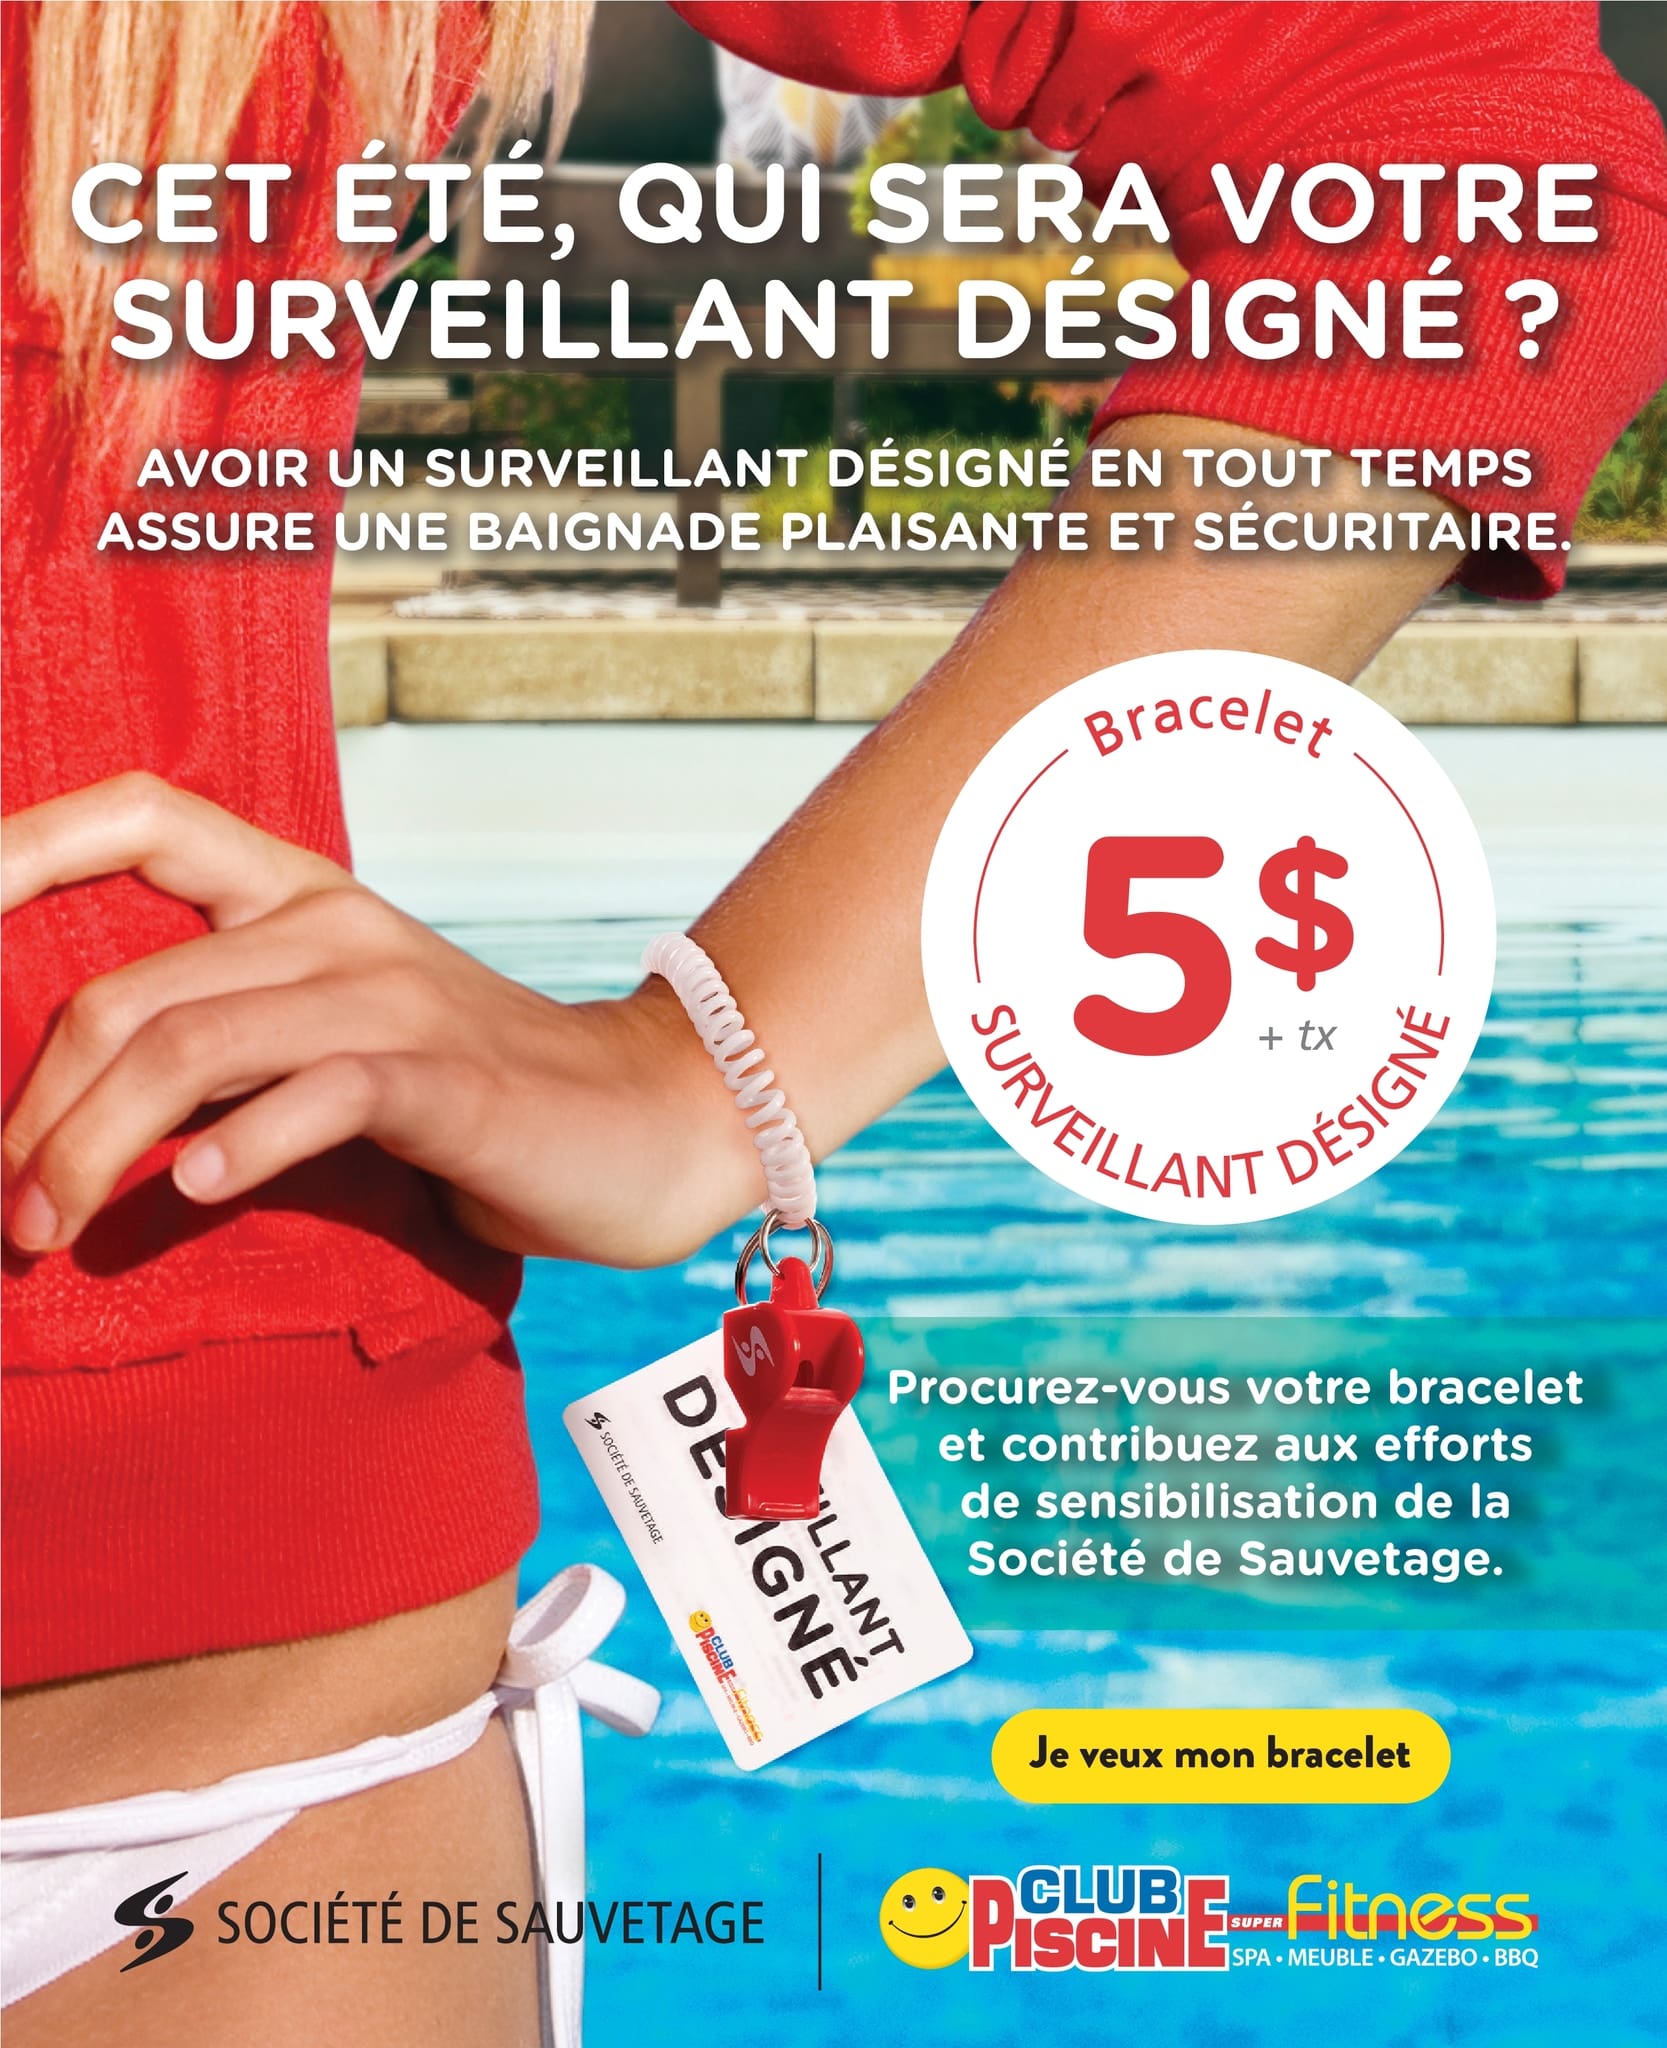 Circulaire Club Piscine Super Fitness - Page 9